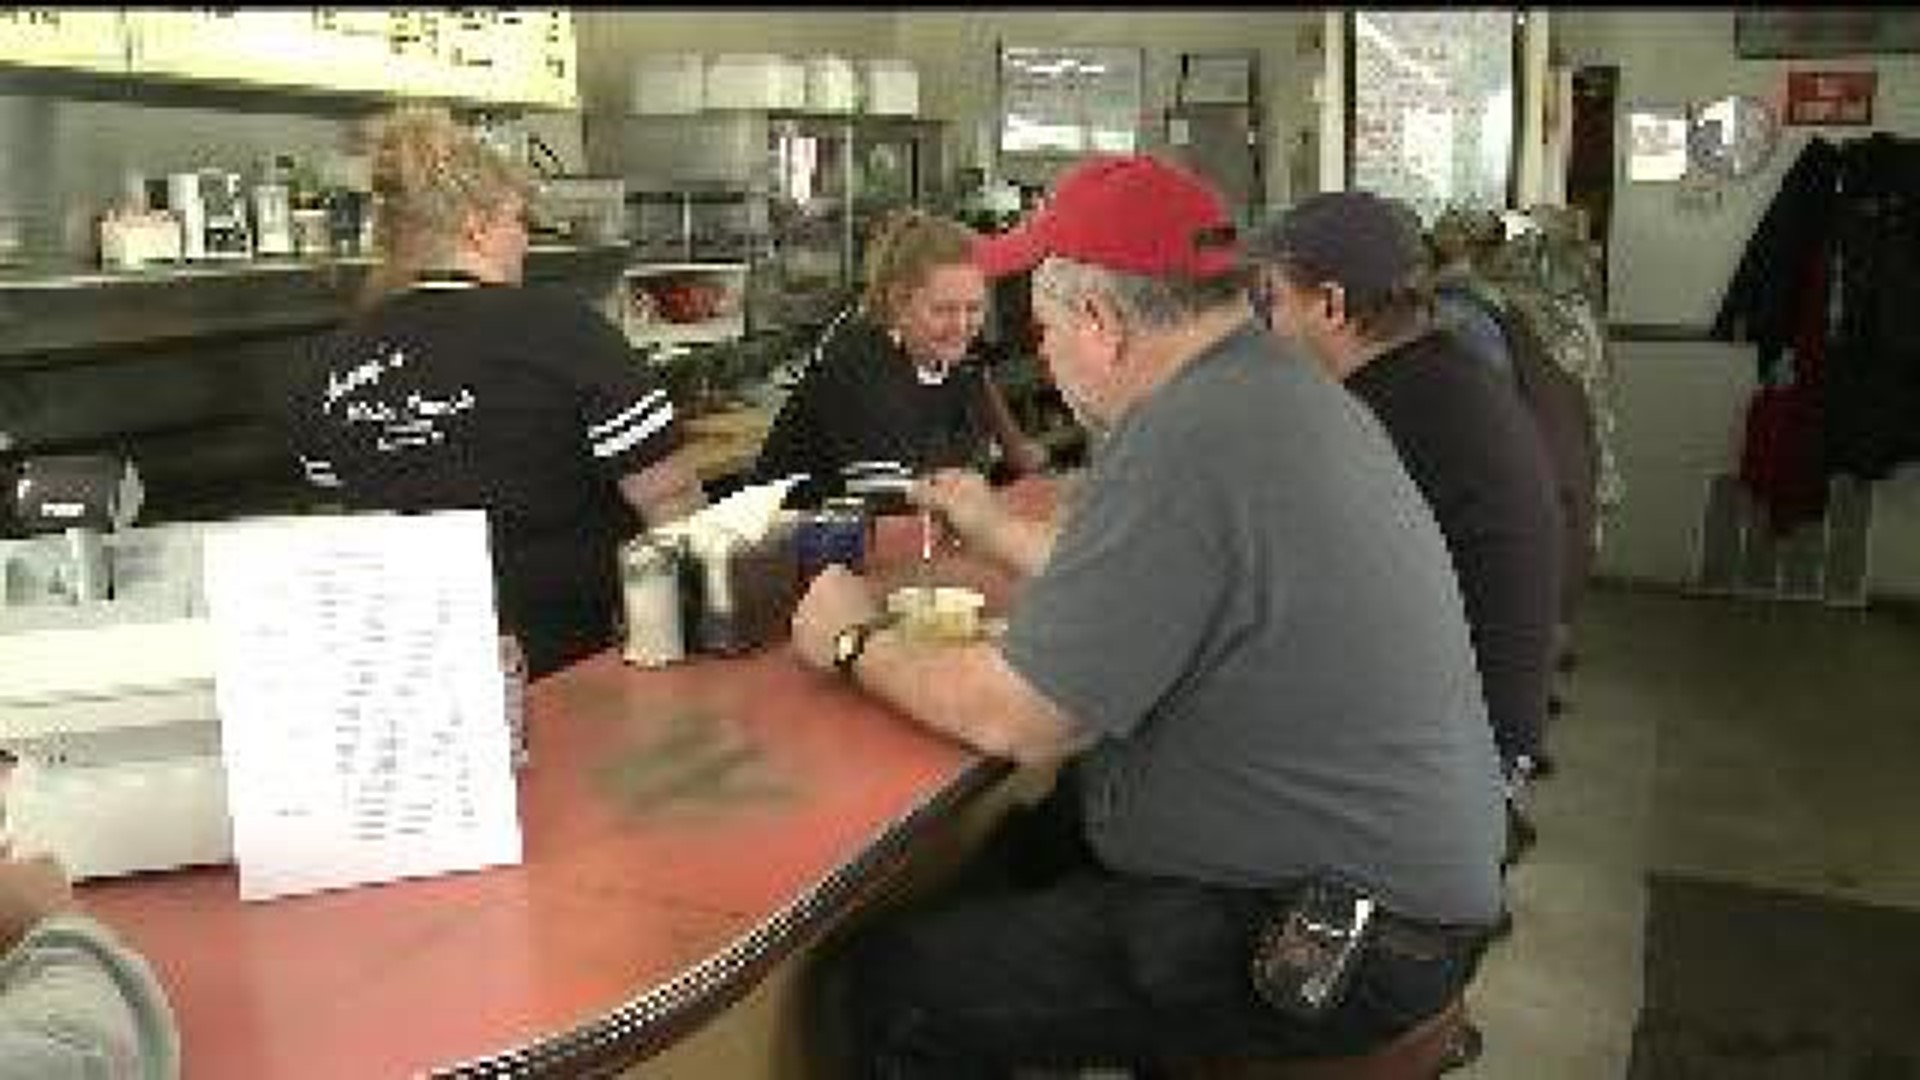 Jerry's Main Lunch serves Burlington with taste and tradition